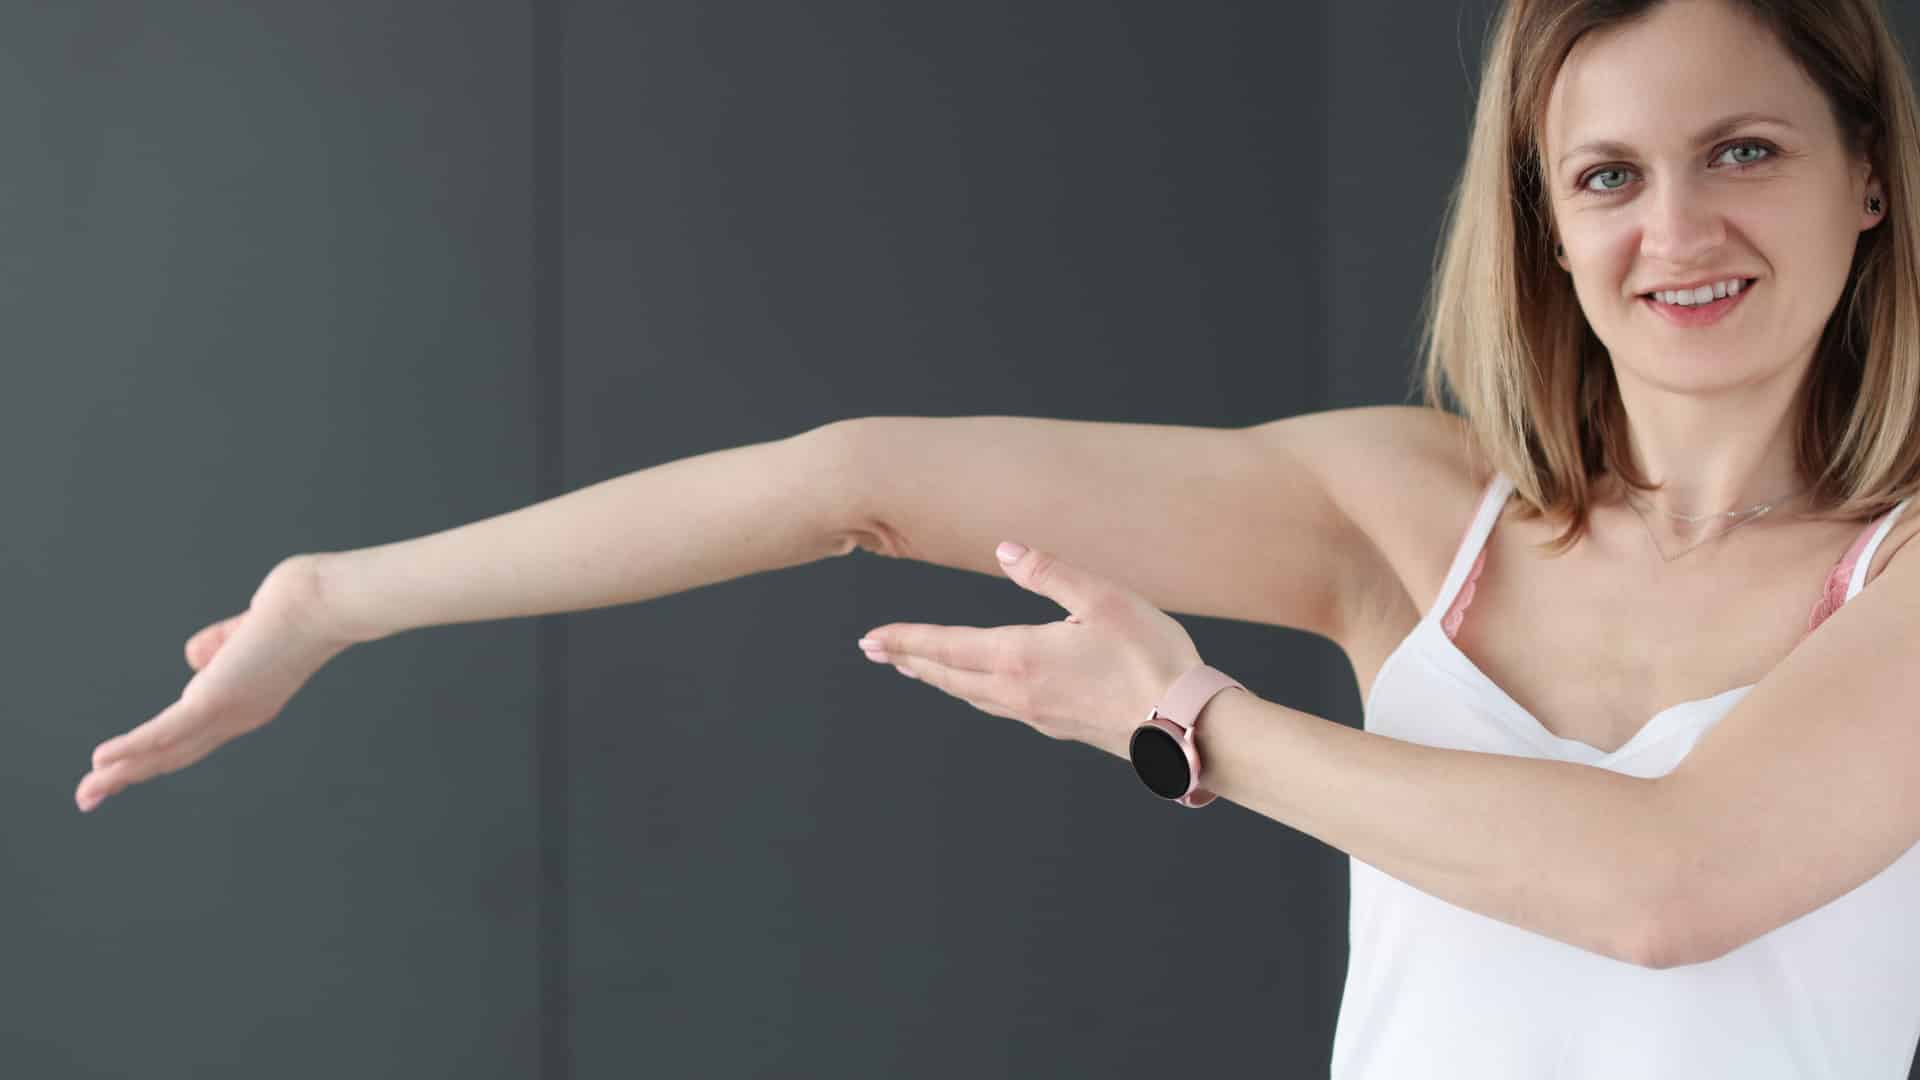 Young woman with shoulder length blond hair wearing a white camisole standing in front of  a dark gray wall demonstrating her flexibility for Ehlers-Danlos Syndrome (EDS) and Hypermobility Awareness Month by hyperextending her right elbow.